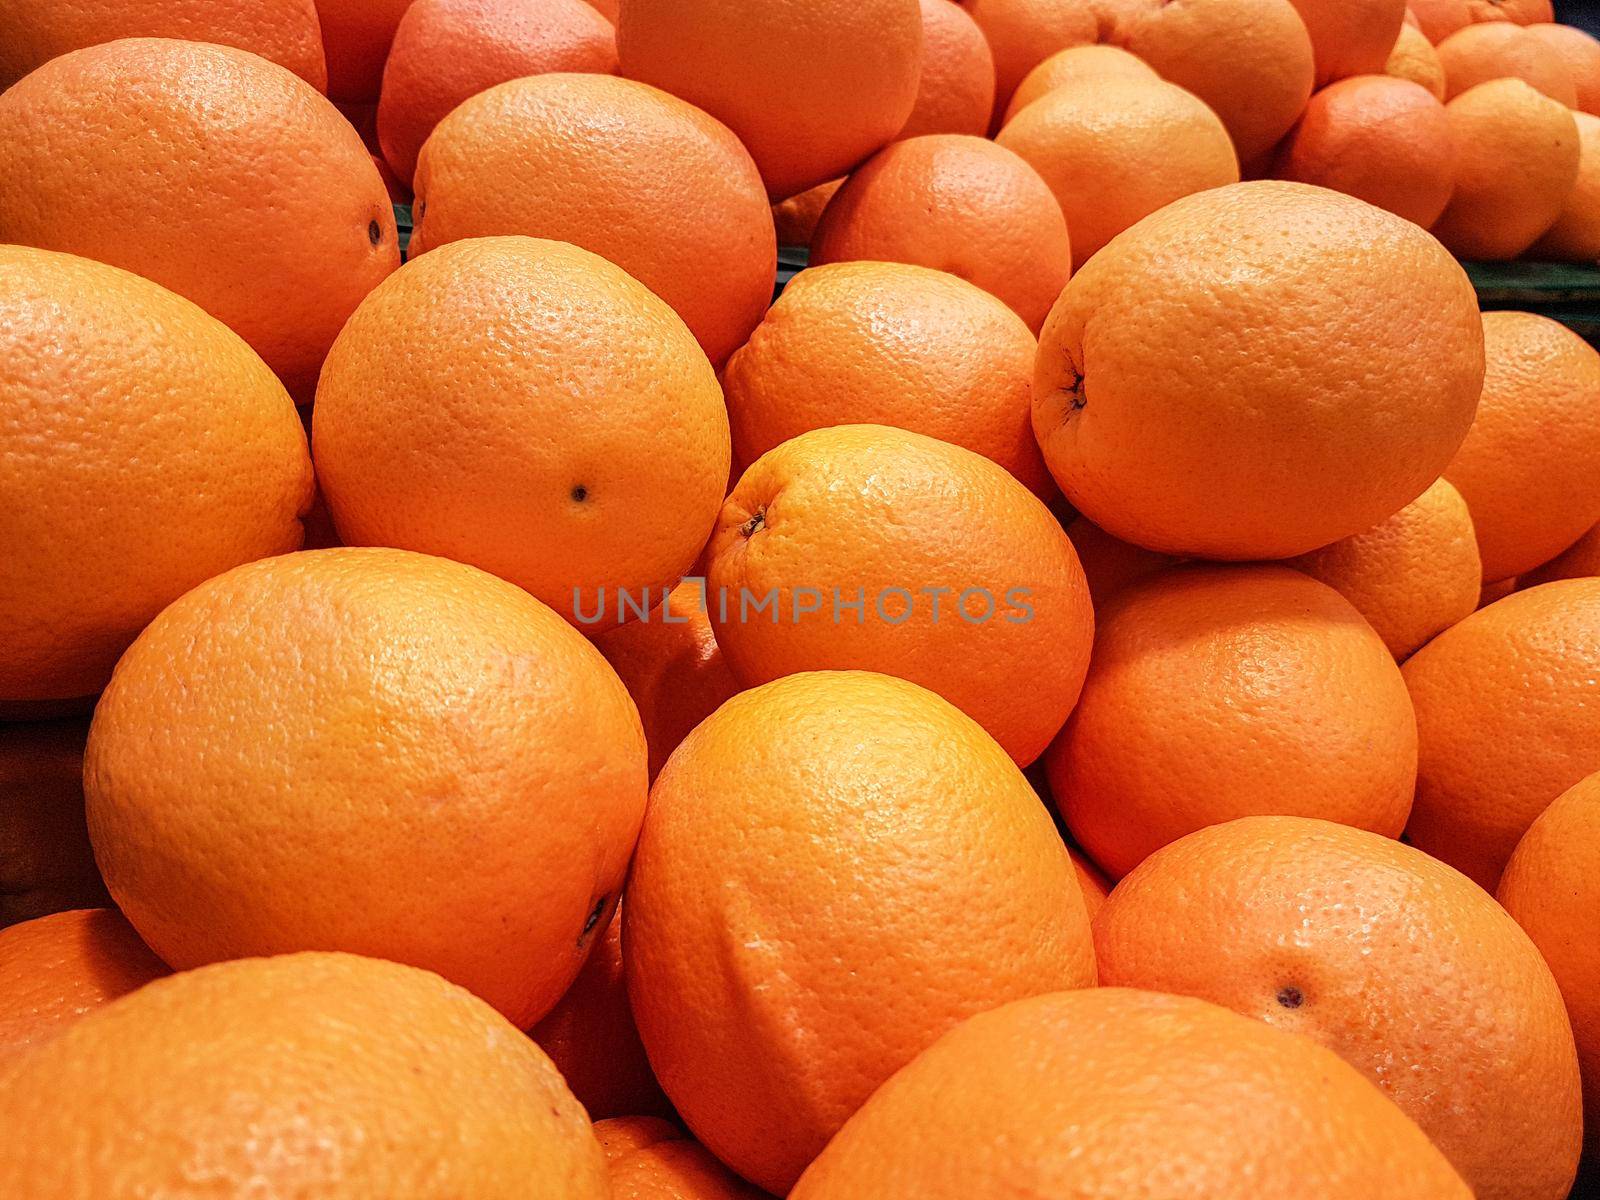 Close-up of a fresh orange fruits for sale as an agricultural background or texture.